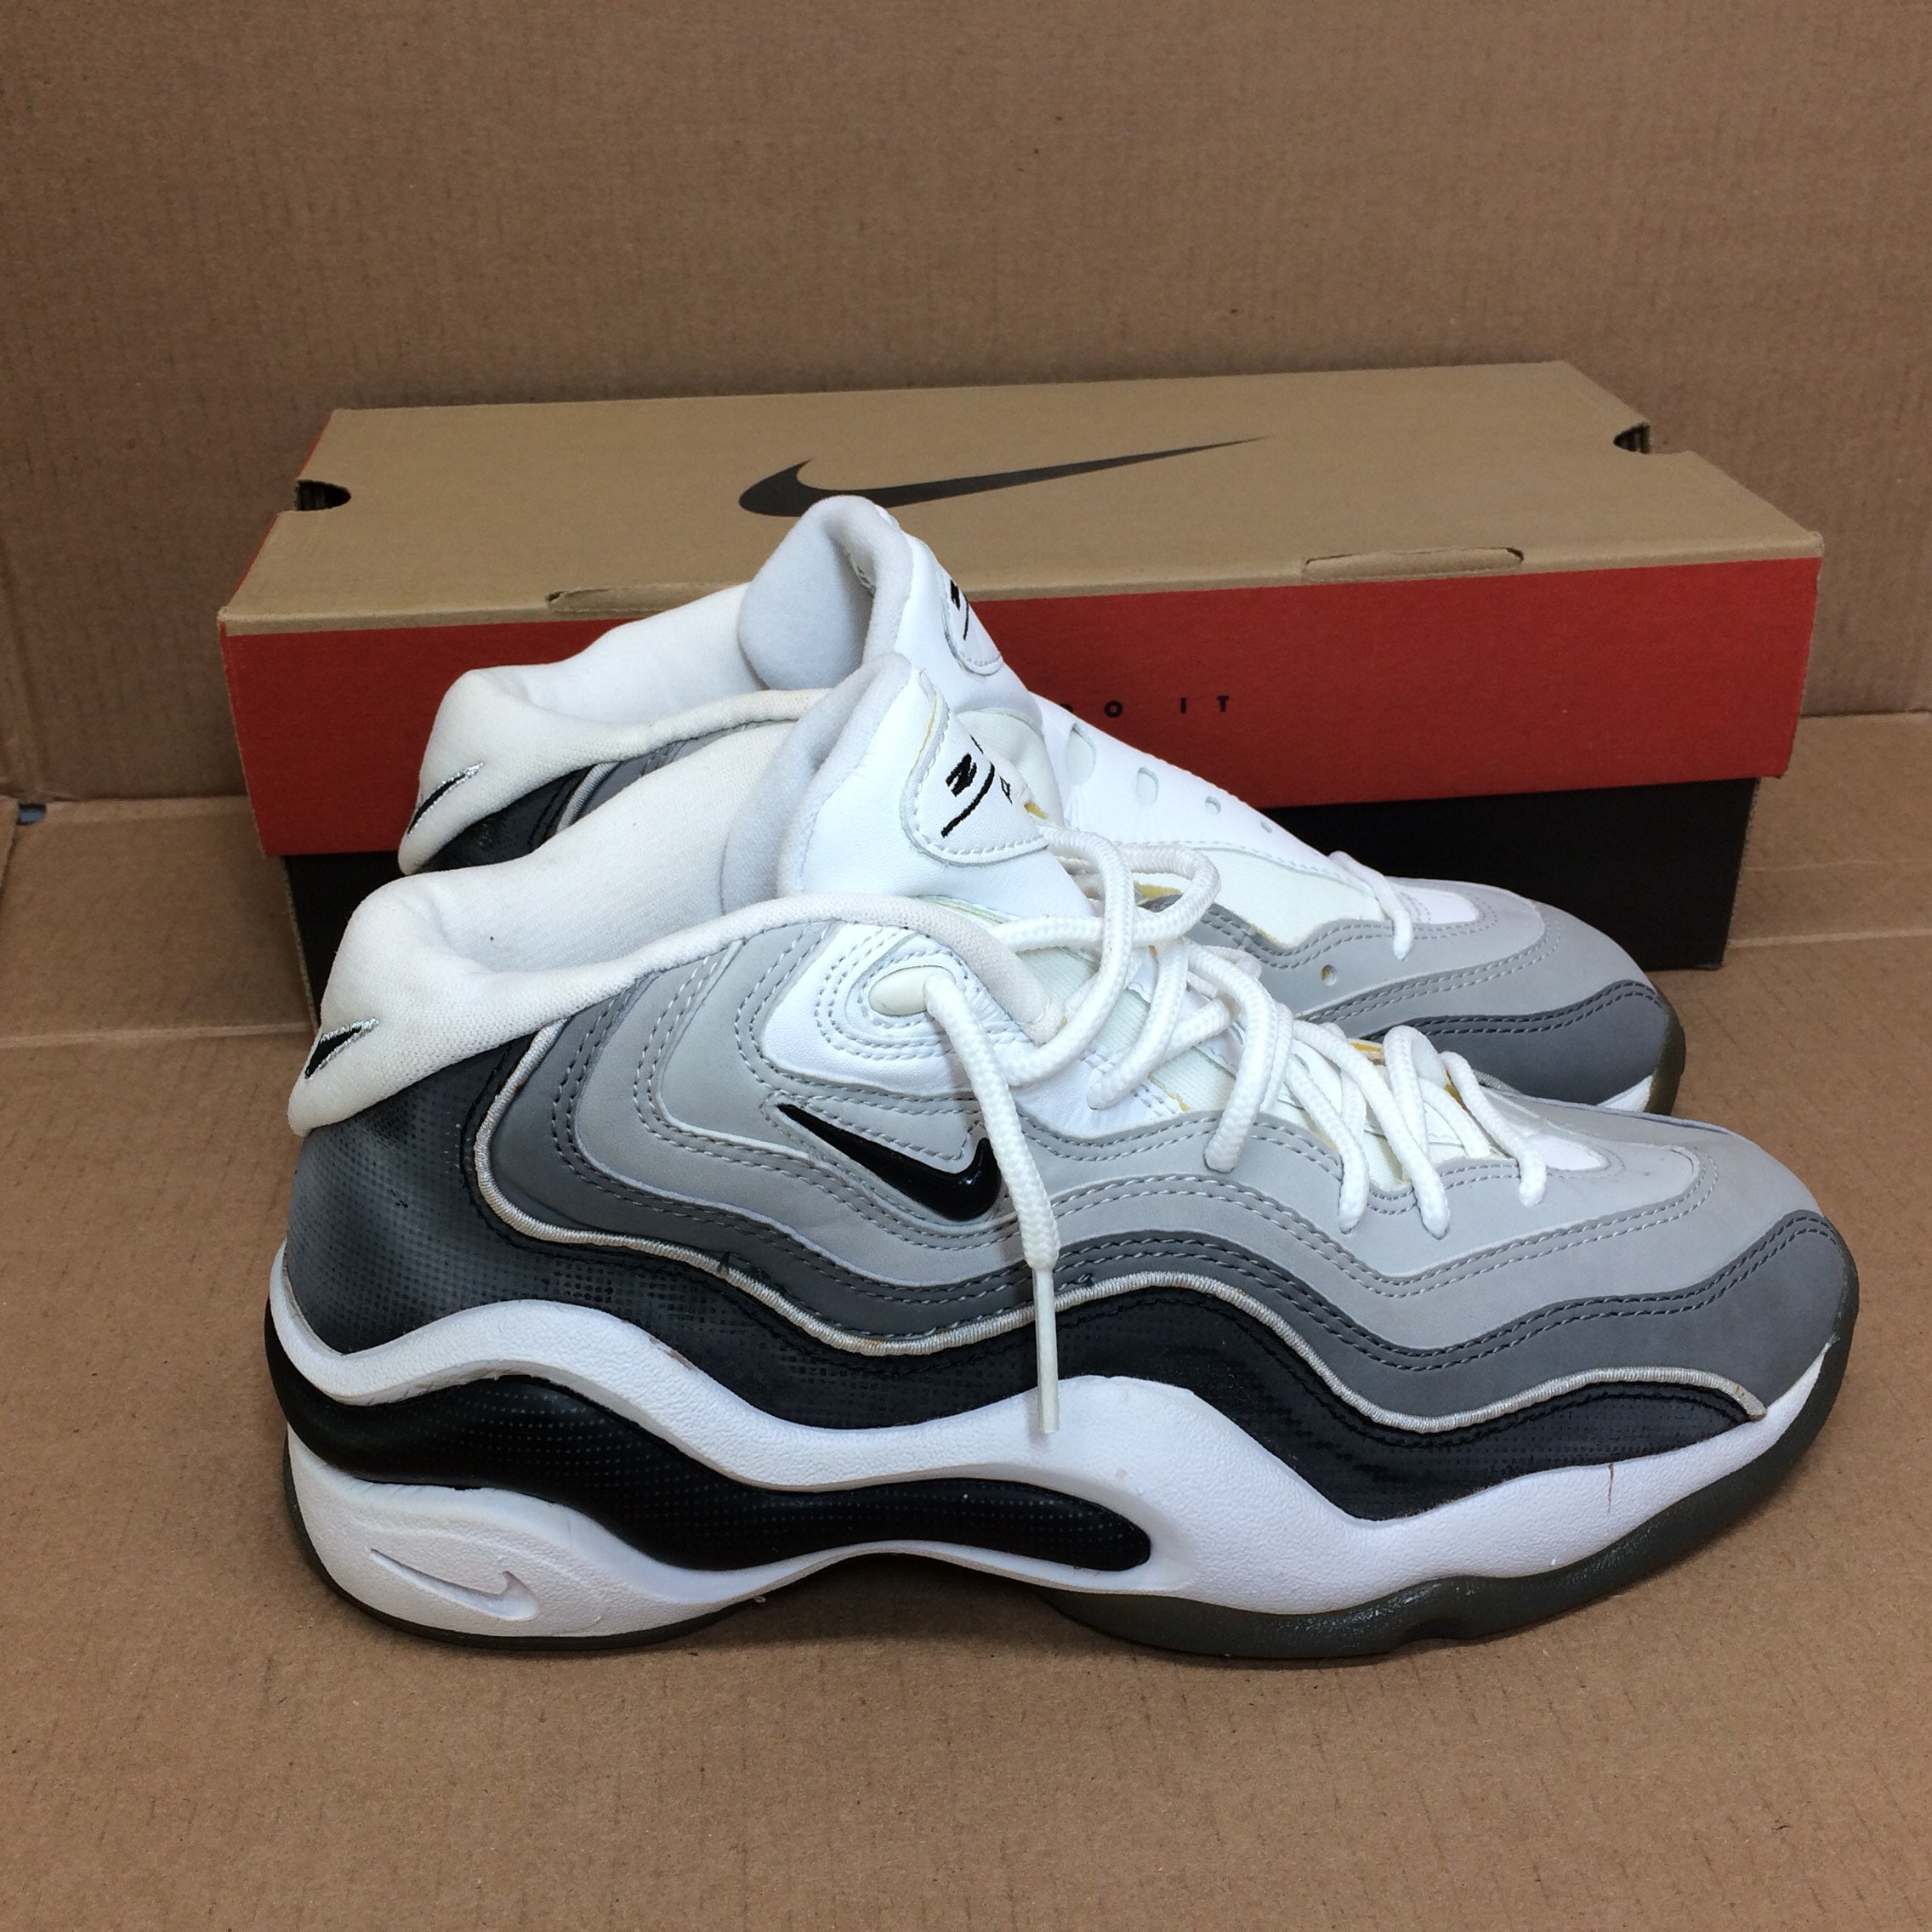 Nike Air Zoom Flight 96 Basketball Shoes Size 8.5 - Etsy